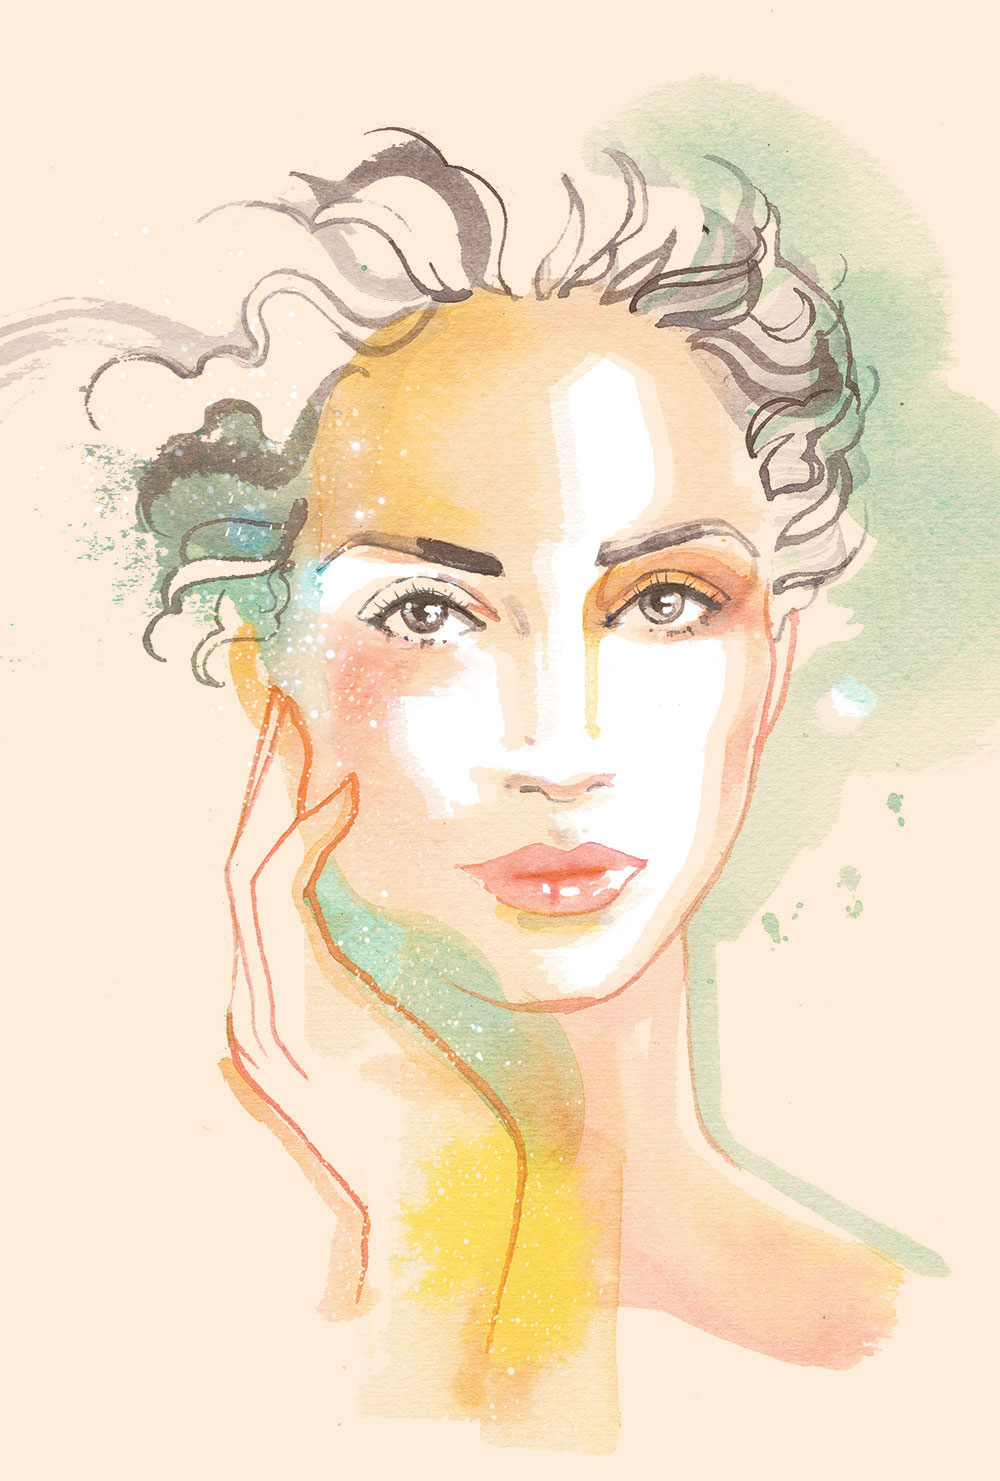 Beauty illustration of Woman with Glowing Skin - Migros Magazine, 2021